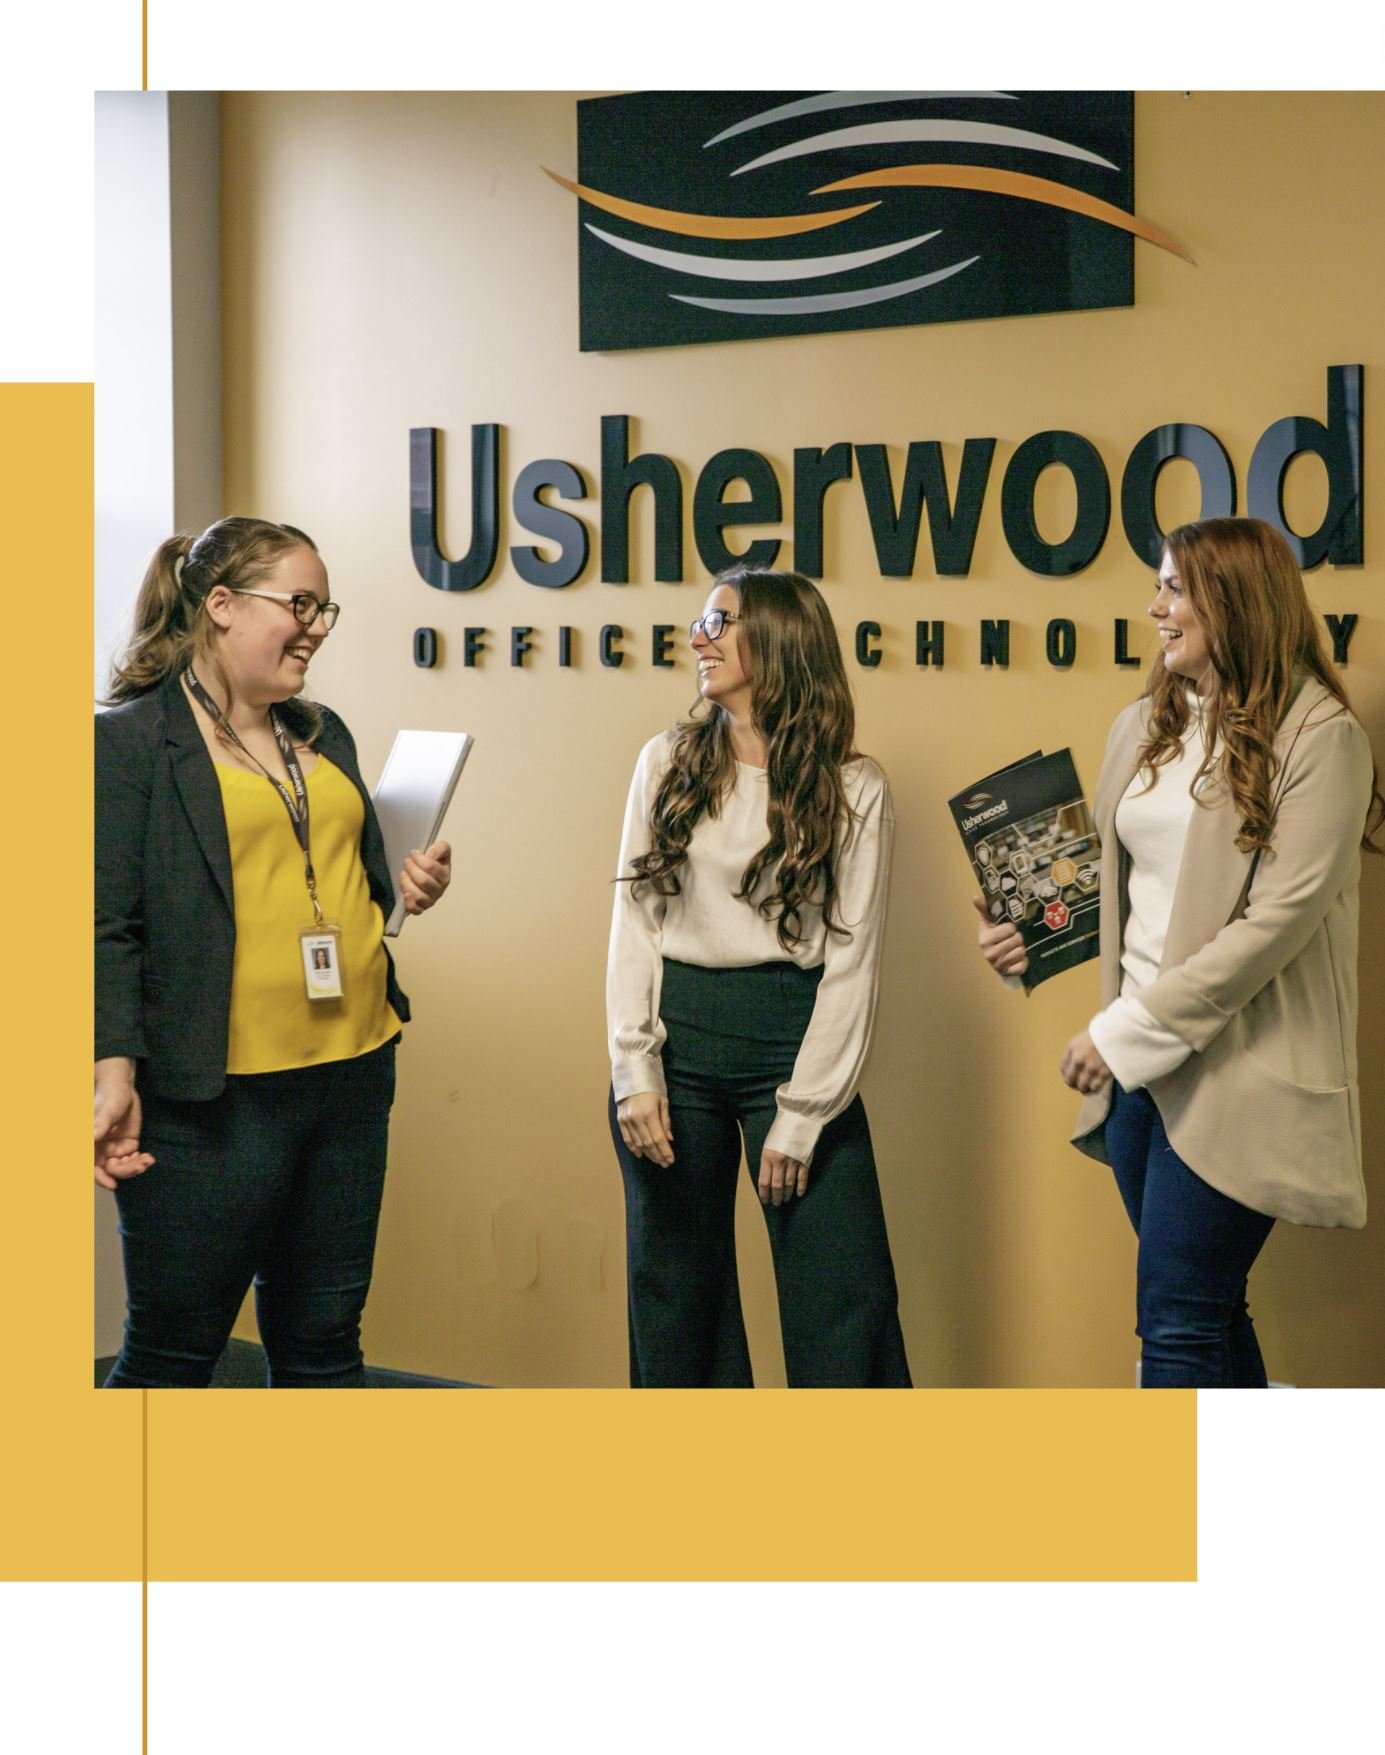 Three women employees standing in front of Usherwood sign talking and smiling